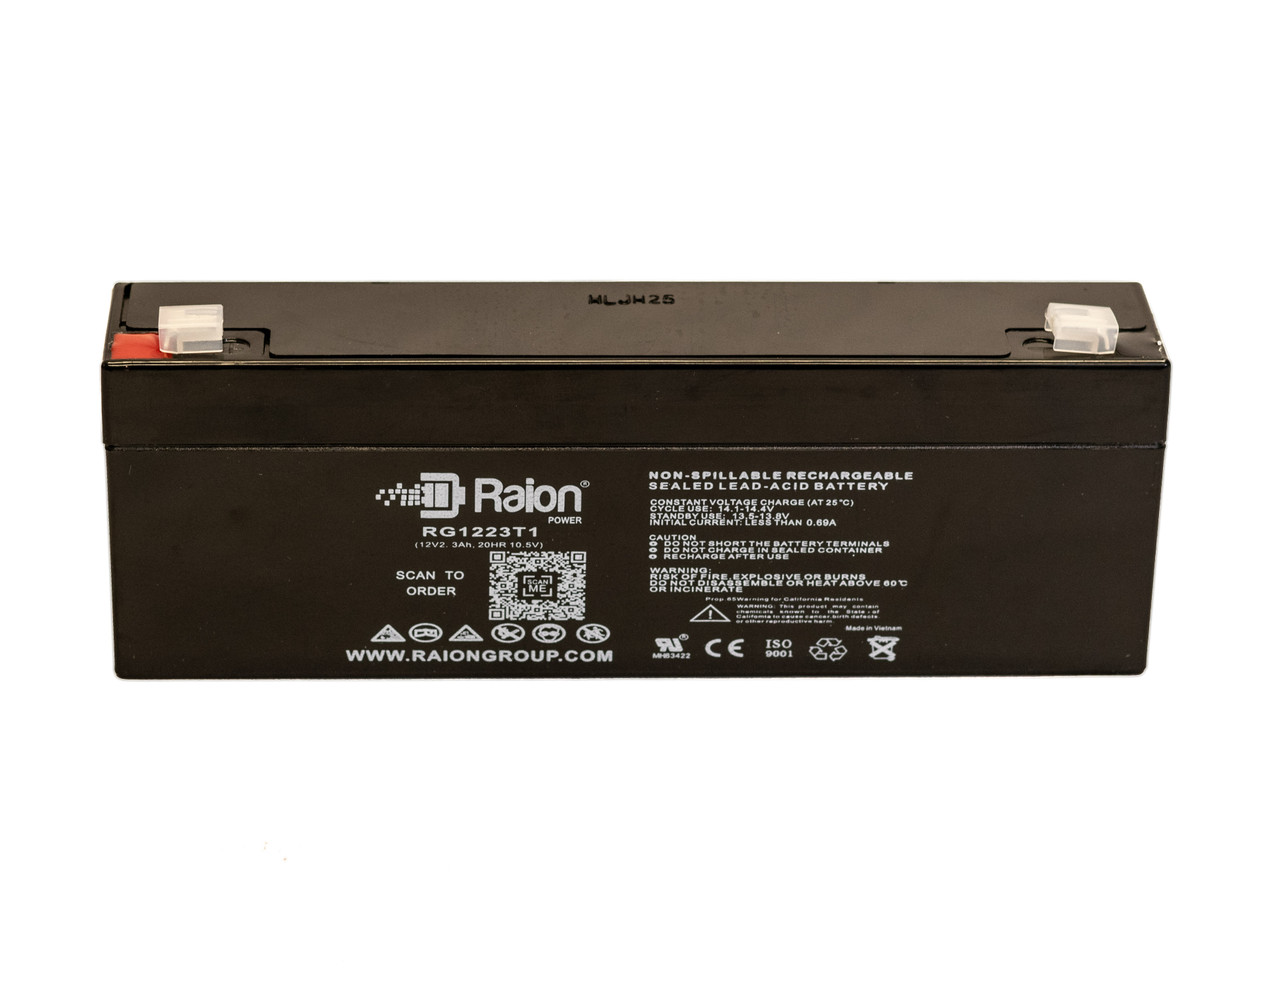 Raion Power 12V 2.3Ah SLA Battery With T1 Terminals For PM PM1223